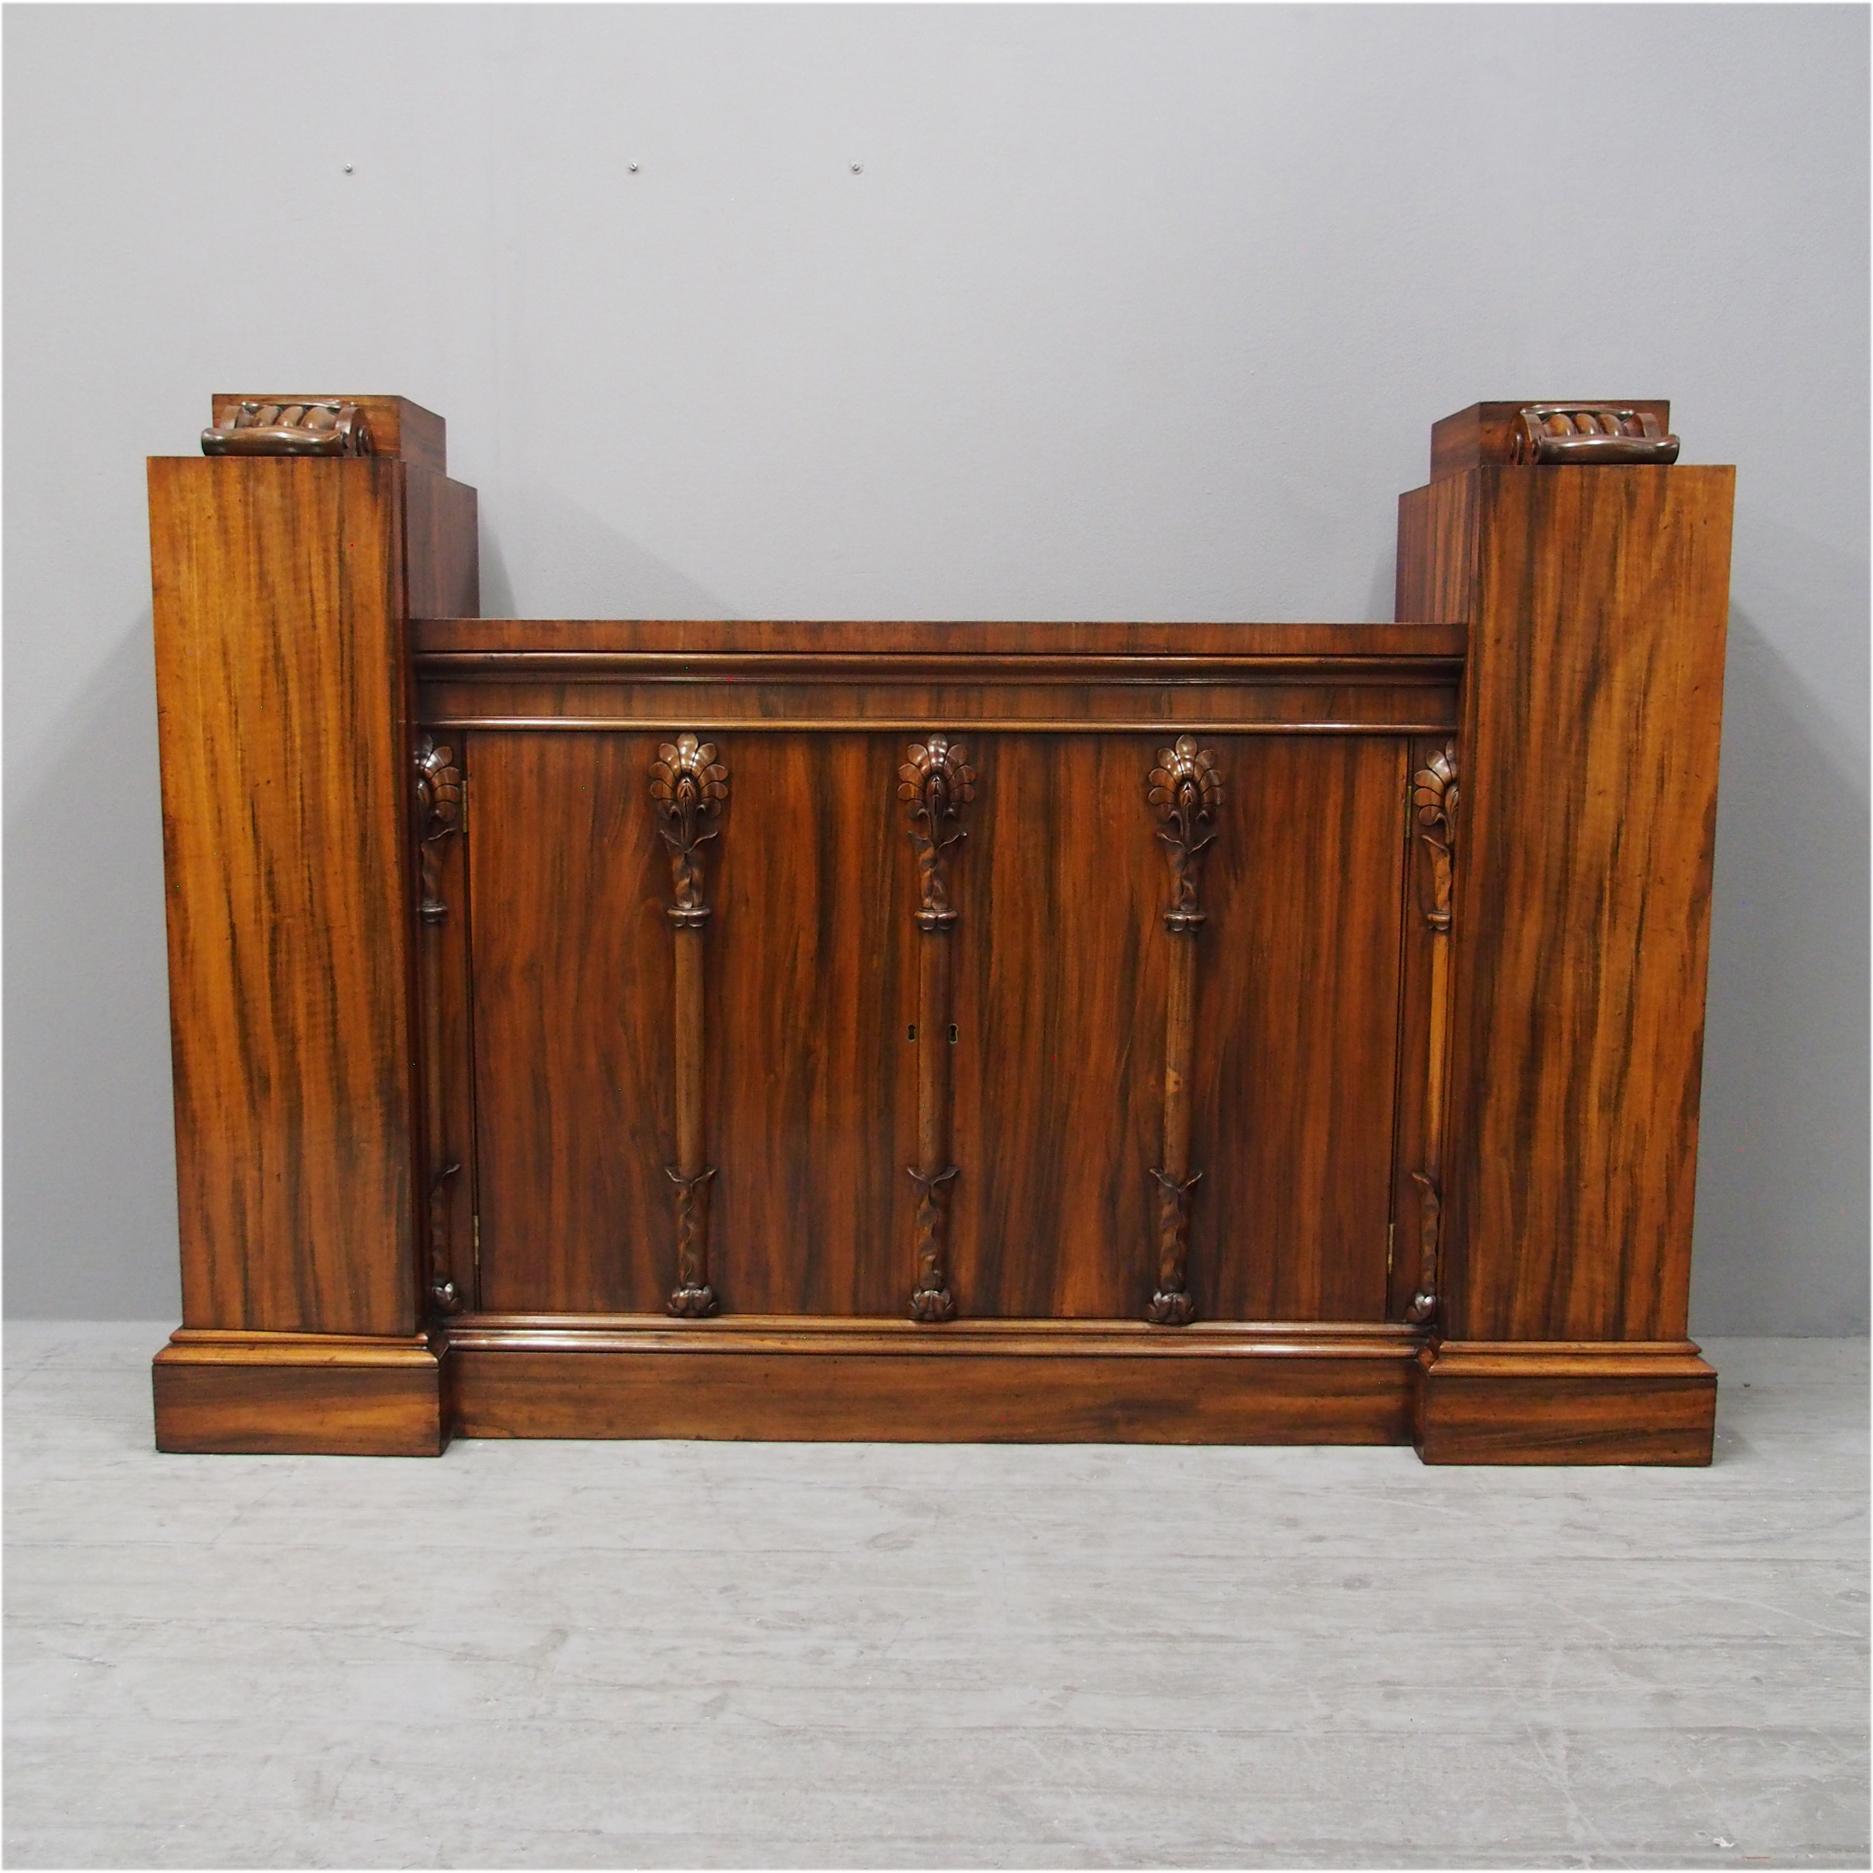 Rare Regency, goncalo alves (tigerwood) side cabinet, circa 1830. With raised side cupboards surmounted by carved foliate mounted plinths opening to fitted interiors. The lower central section has a well figured top, moulded fore-edge over twin